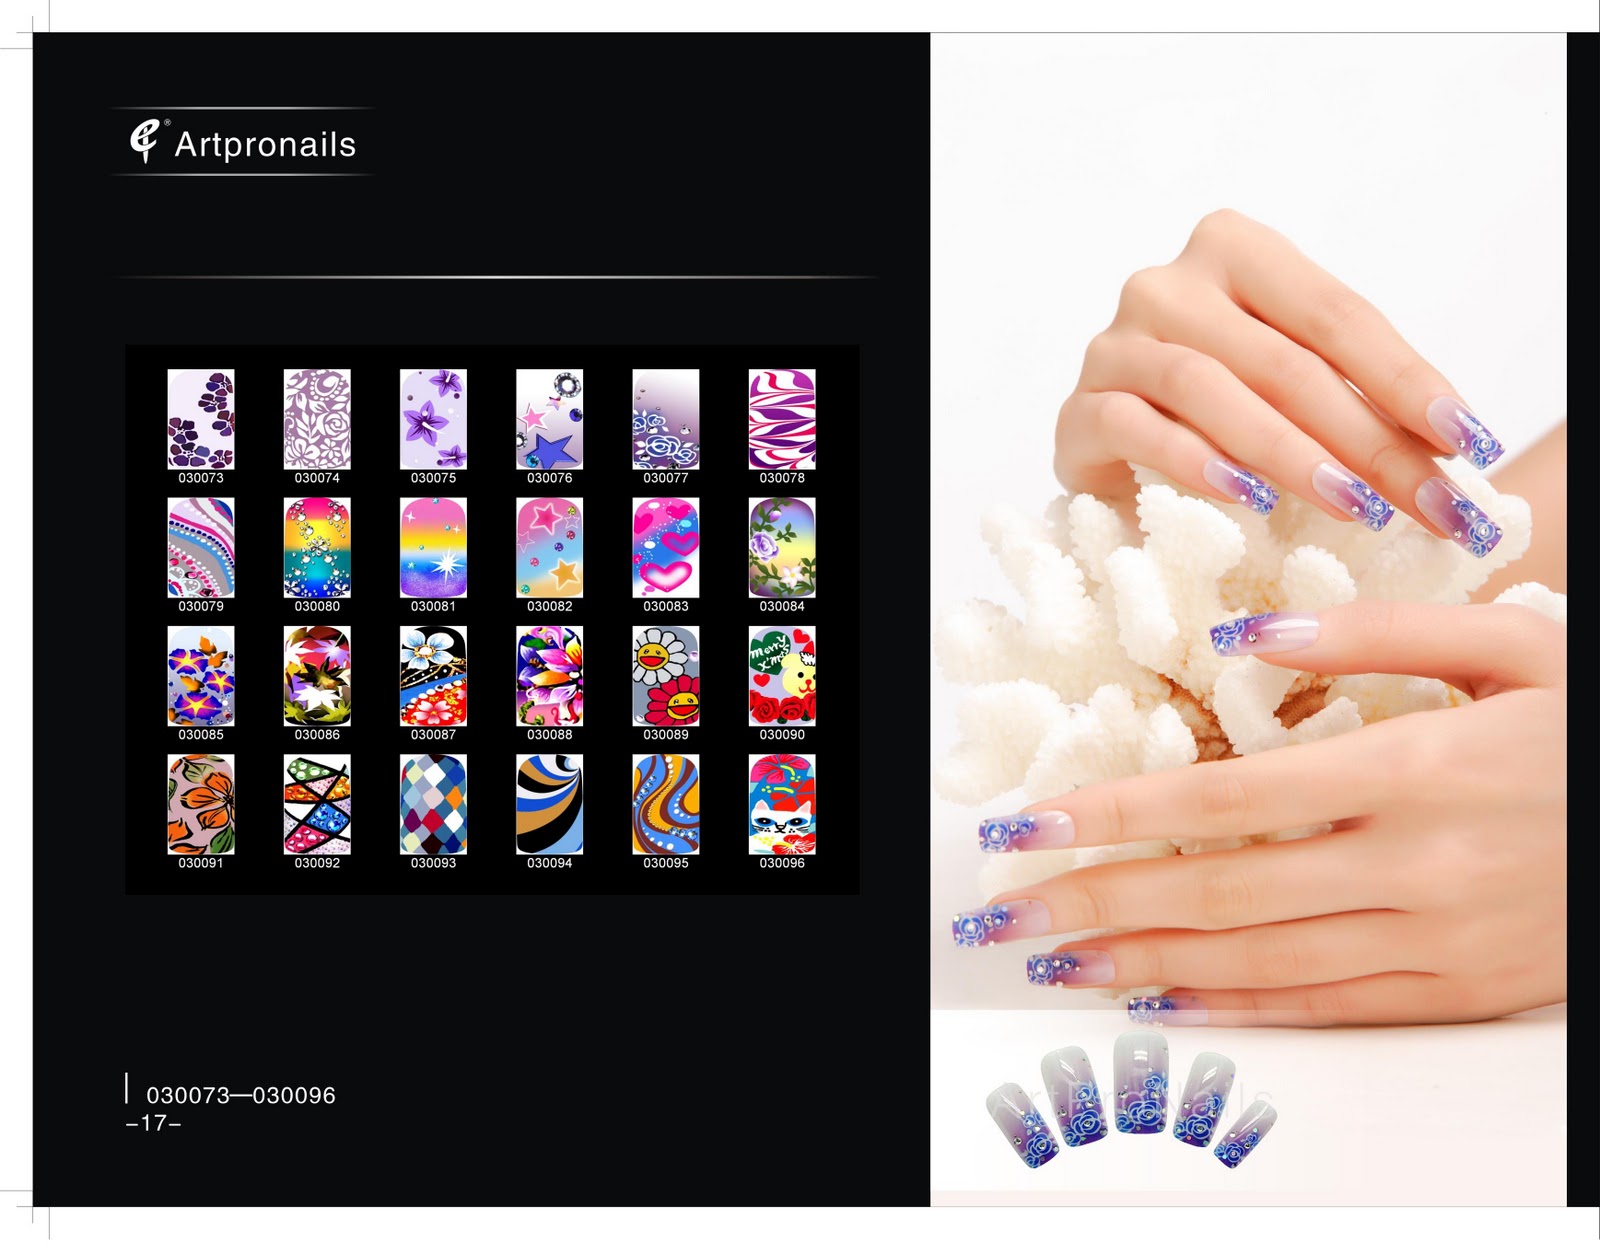 3. Nail Art Catalogs for Inspiration - wide 1